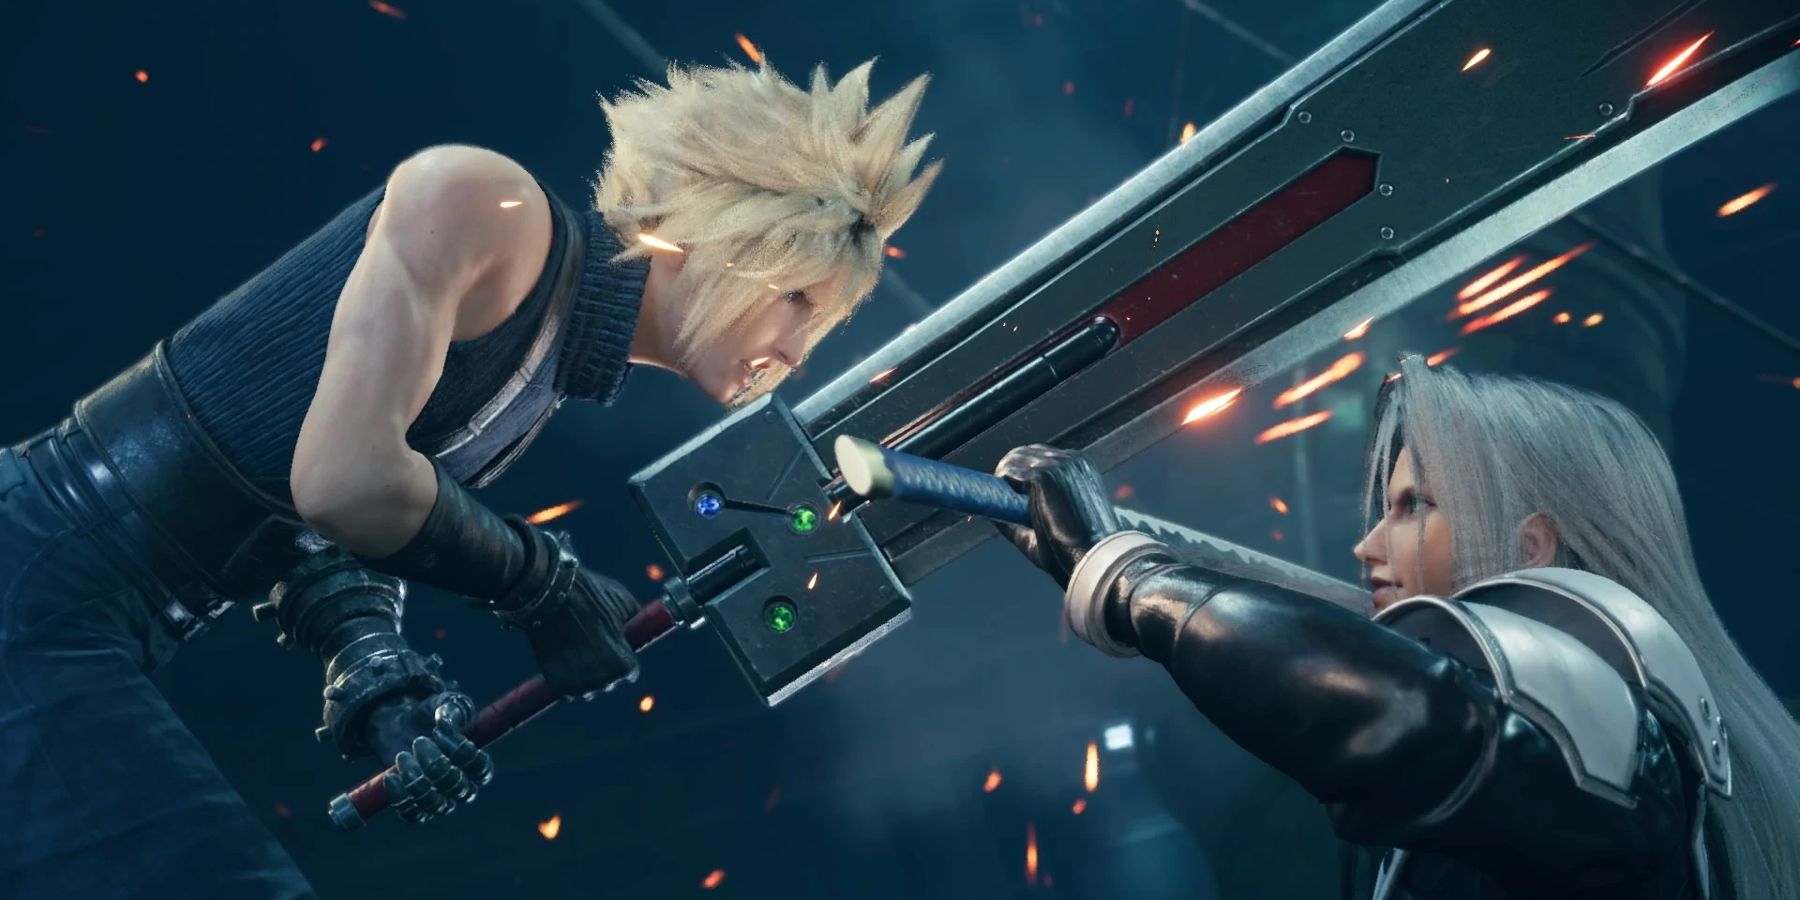 cloud and sephiroth